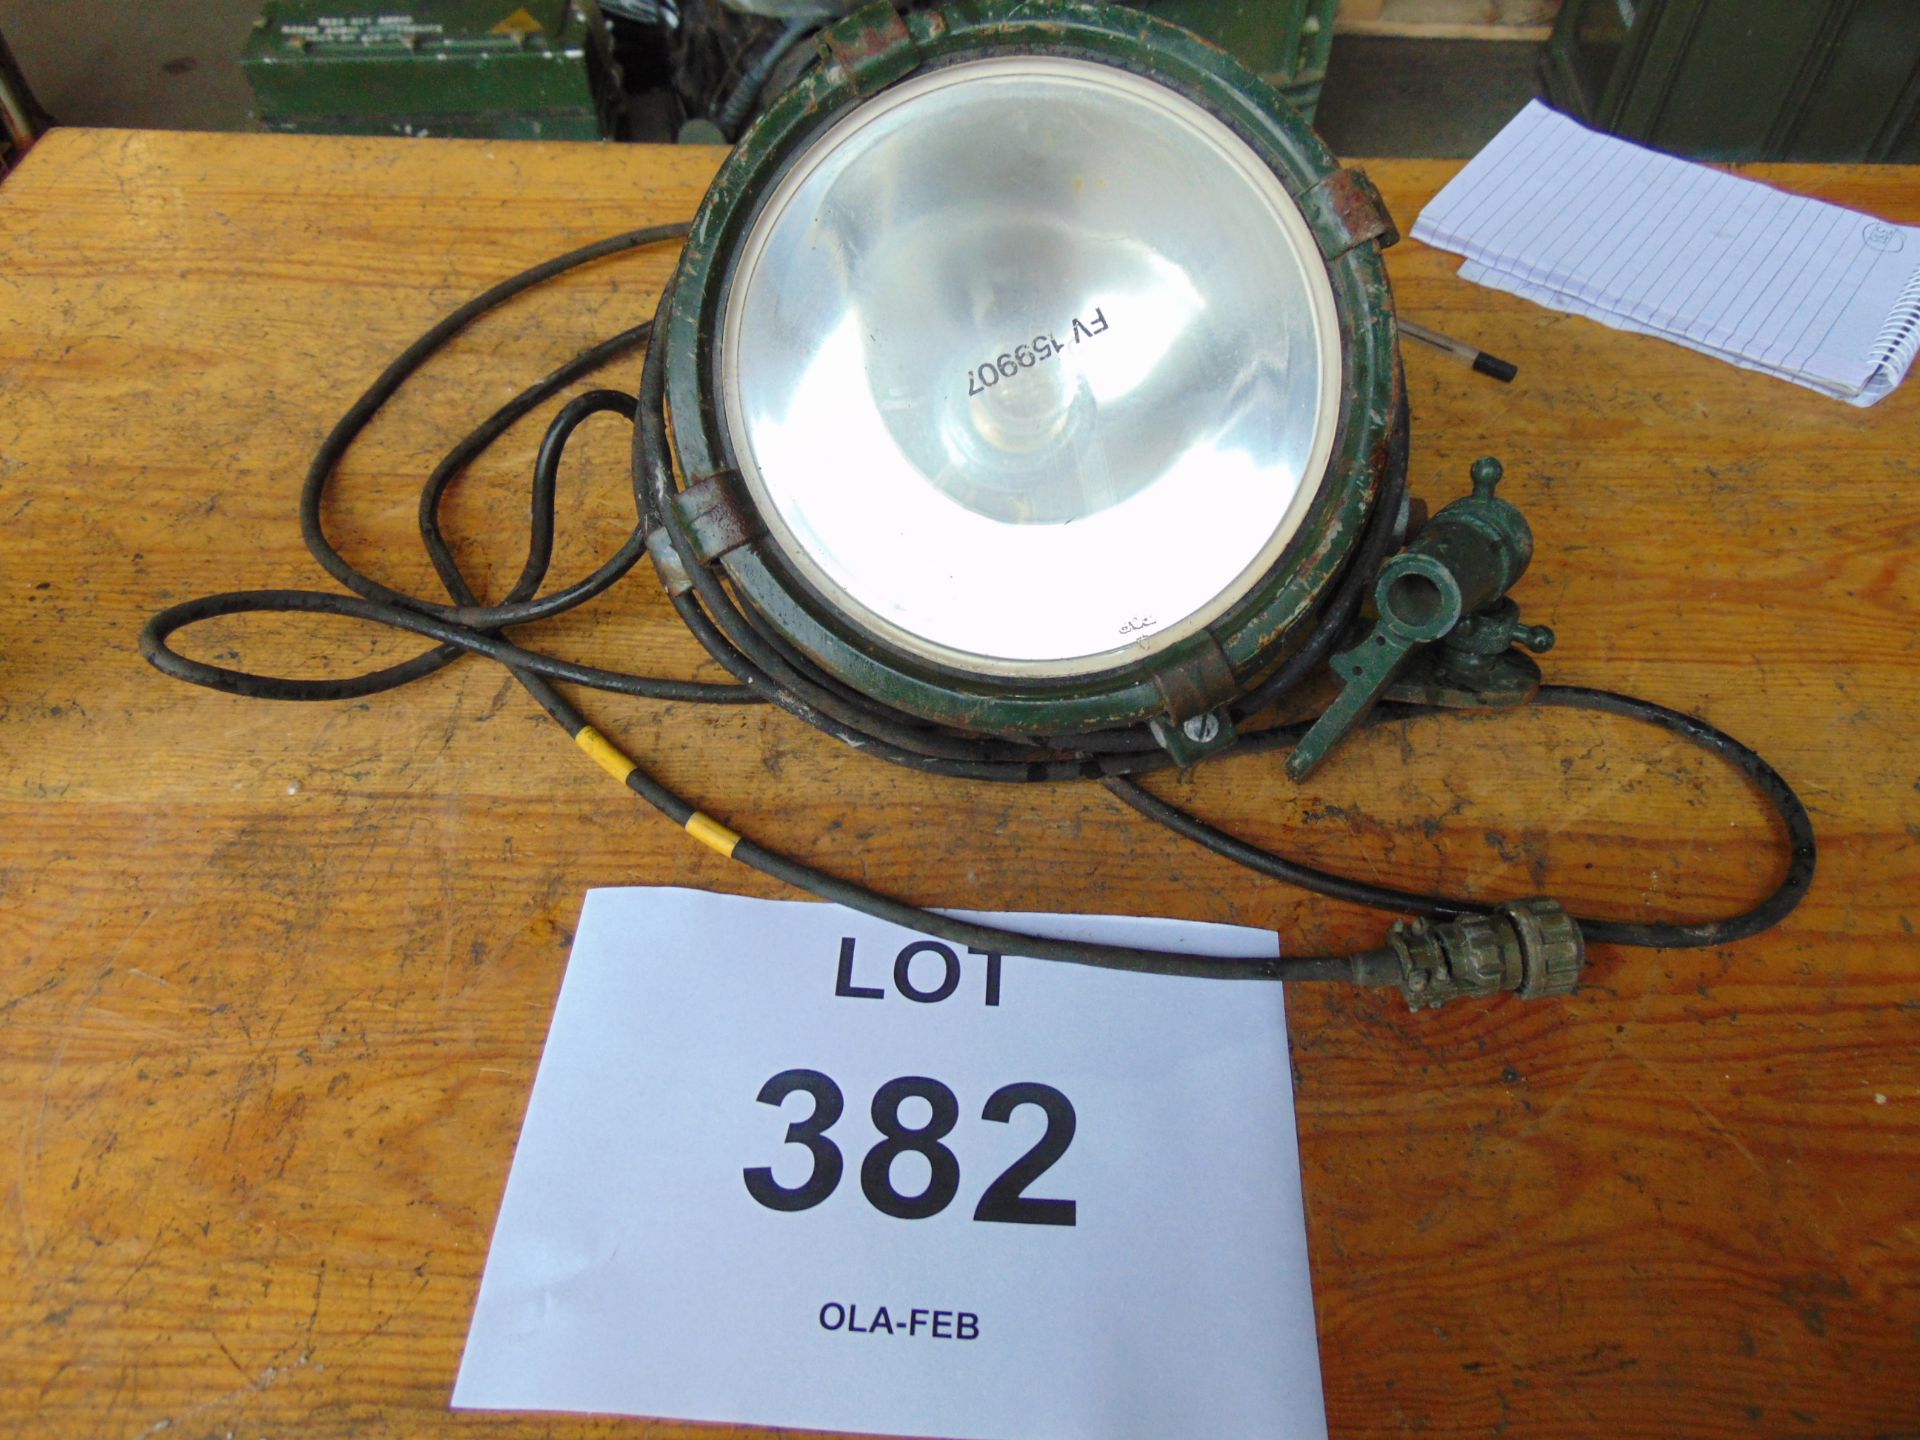 FV159907 Vehicle Spot Lamp c/w Bracket and Lead - Image 4 of 4